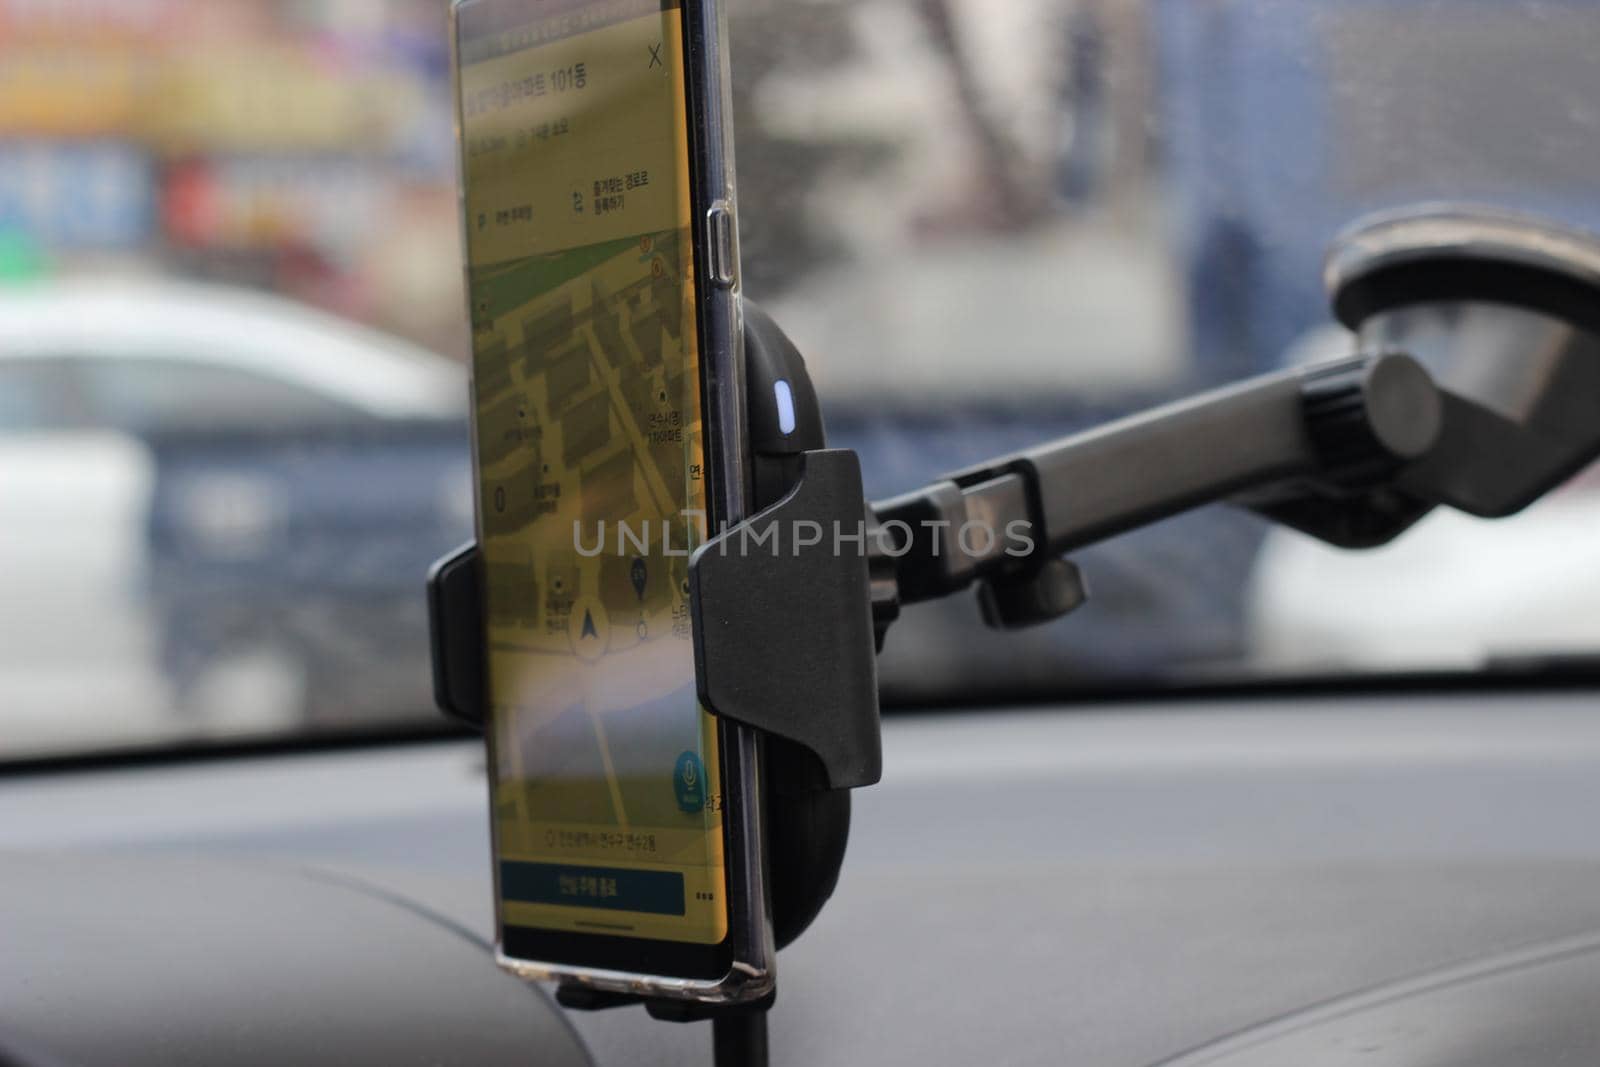 Smart phone holder attached to windscreen of car by Photochowk